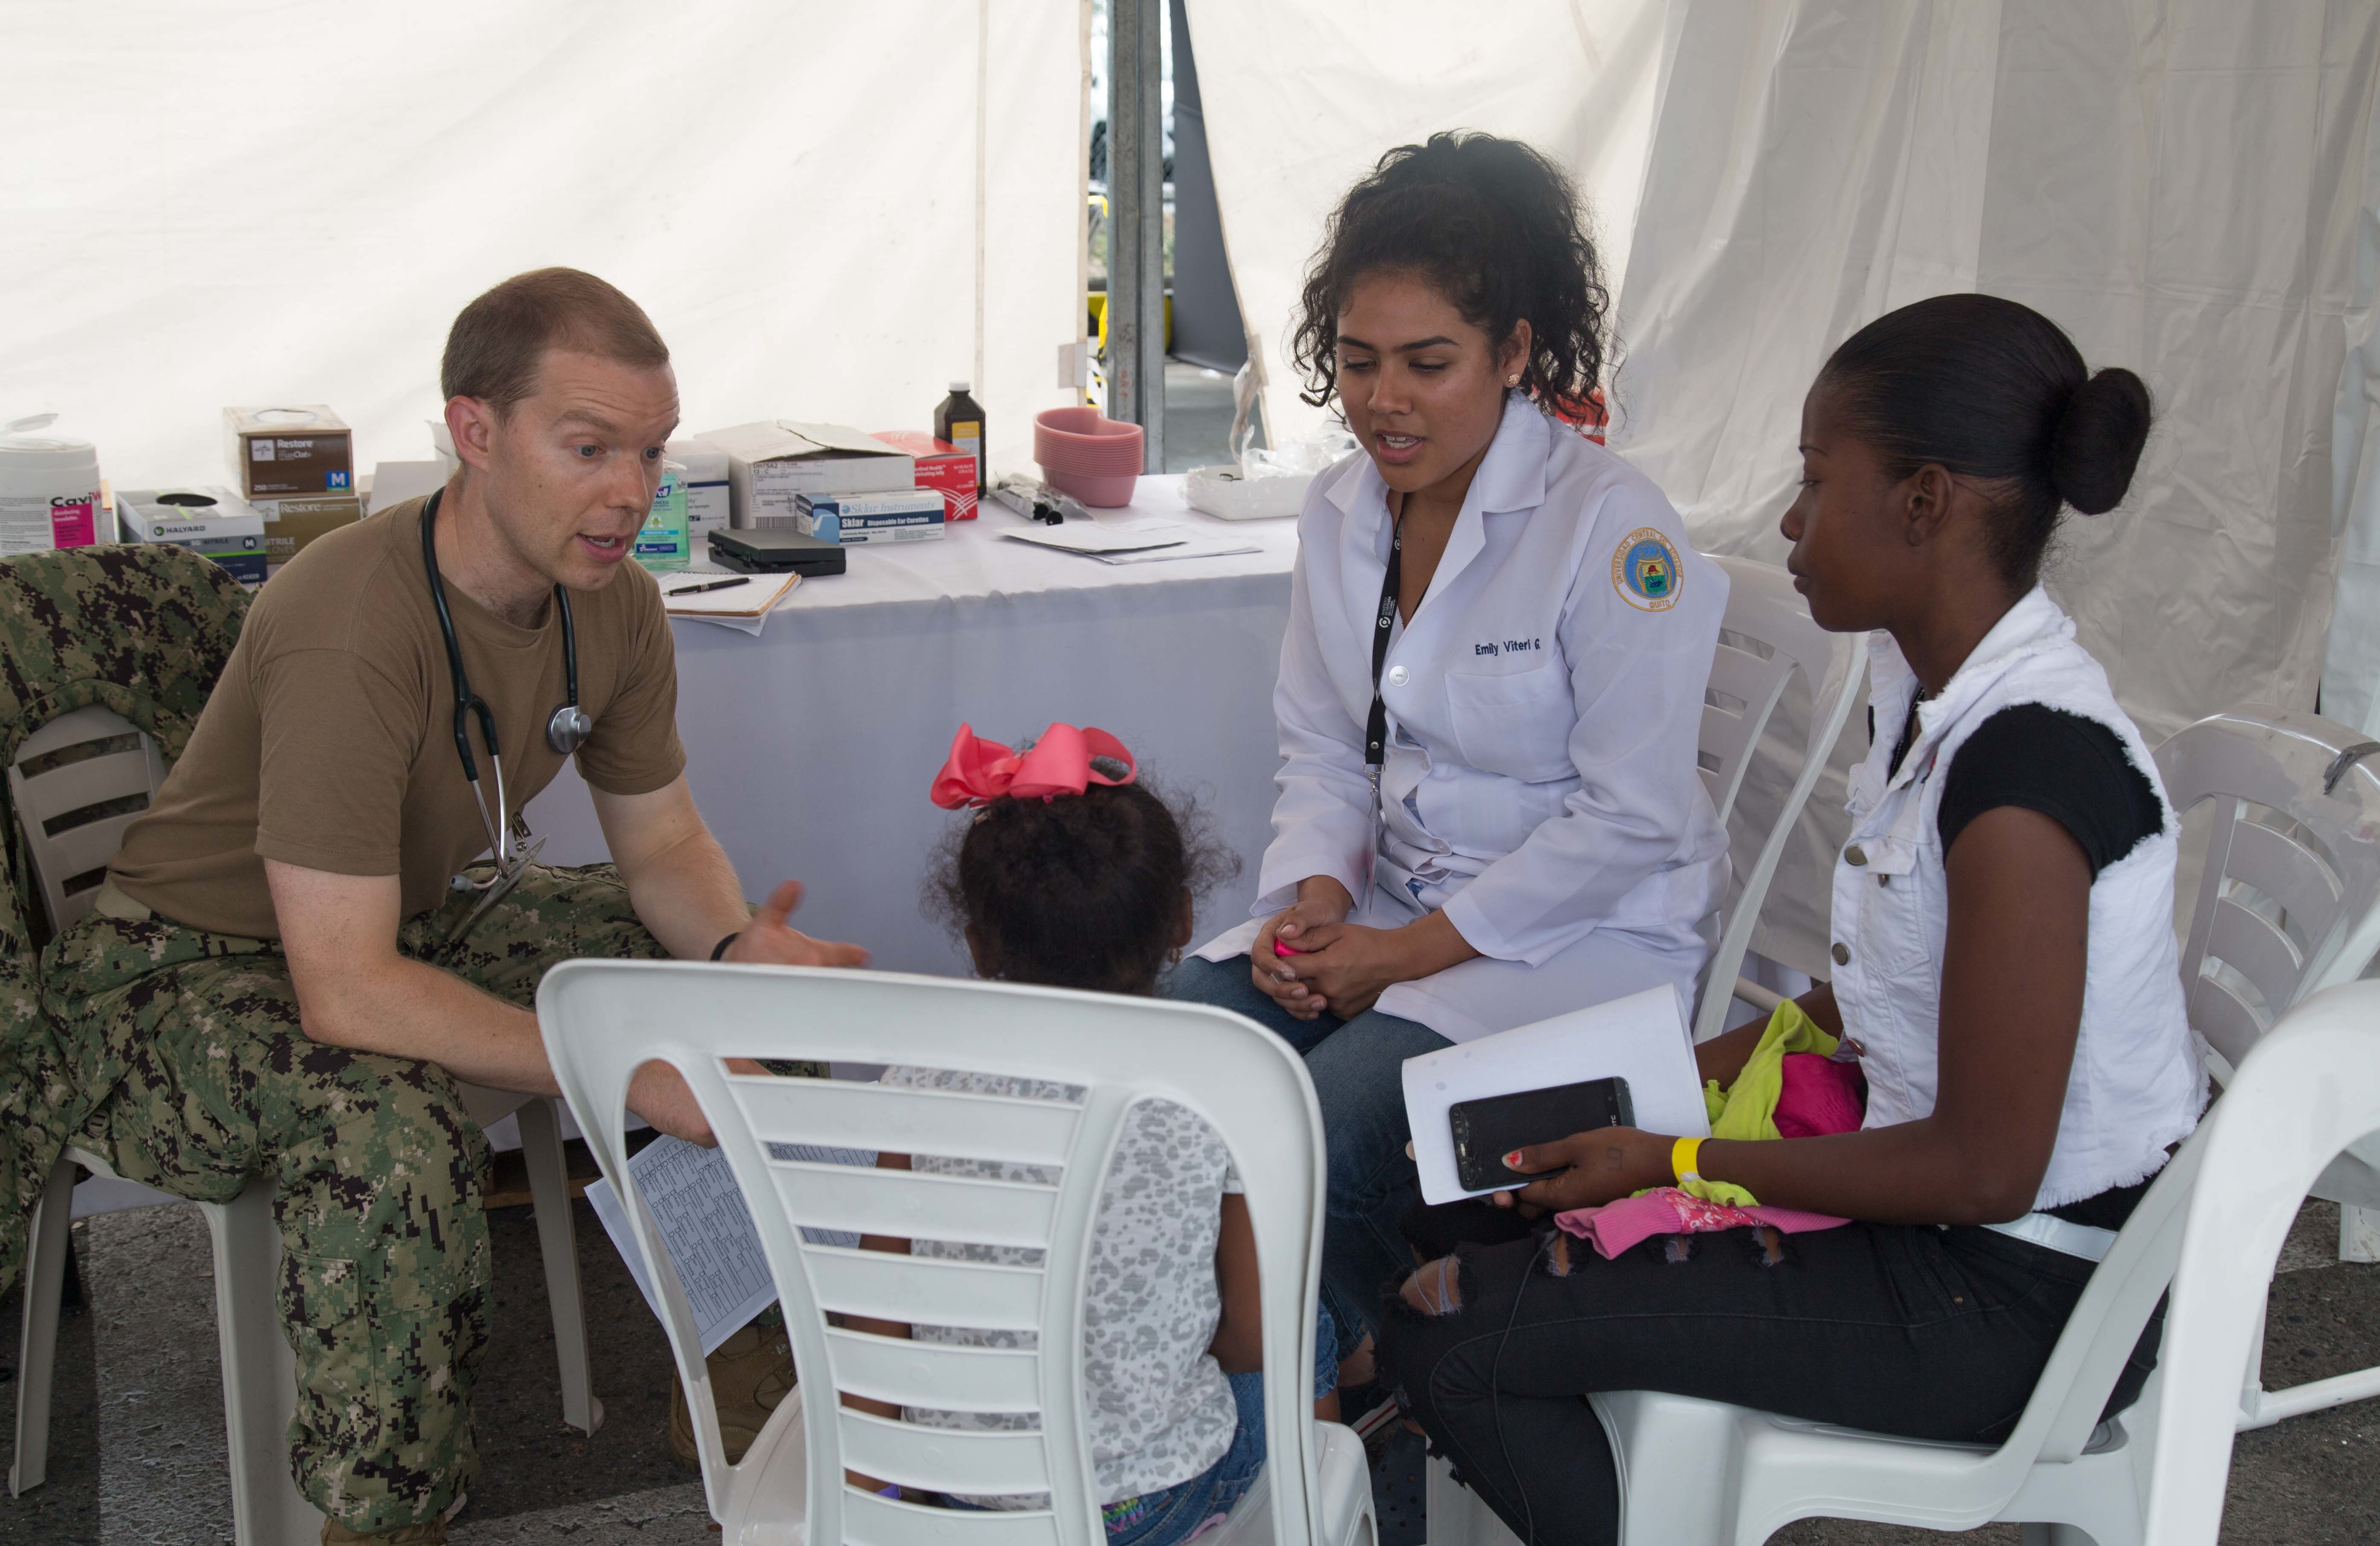 Lt. Andrew Winslow, a pediatrician, from Eden Prairie, Minn., and Emily Vilteri, a medical student enrolled at Central University of Ecuador from Milagro, Ecuador, talk with patients at one of two medical sites. The hospital ship USNS Comfort (T-AH 20) is on an 11-week medical support mission to Central and South America as part of U.S. Southern Command’s Enduring Promise initiative.